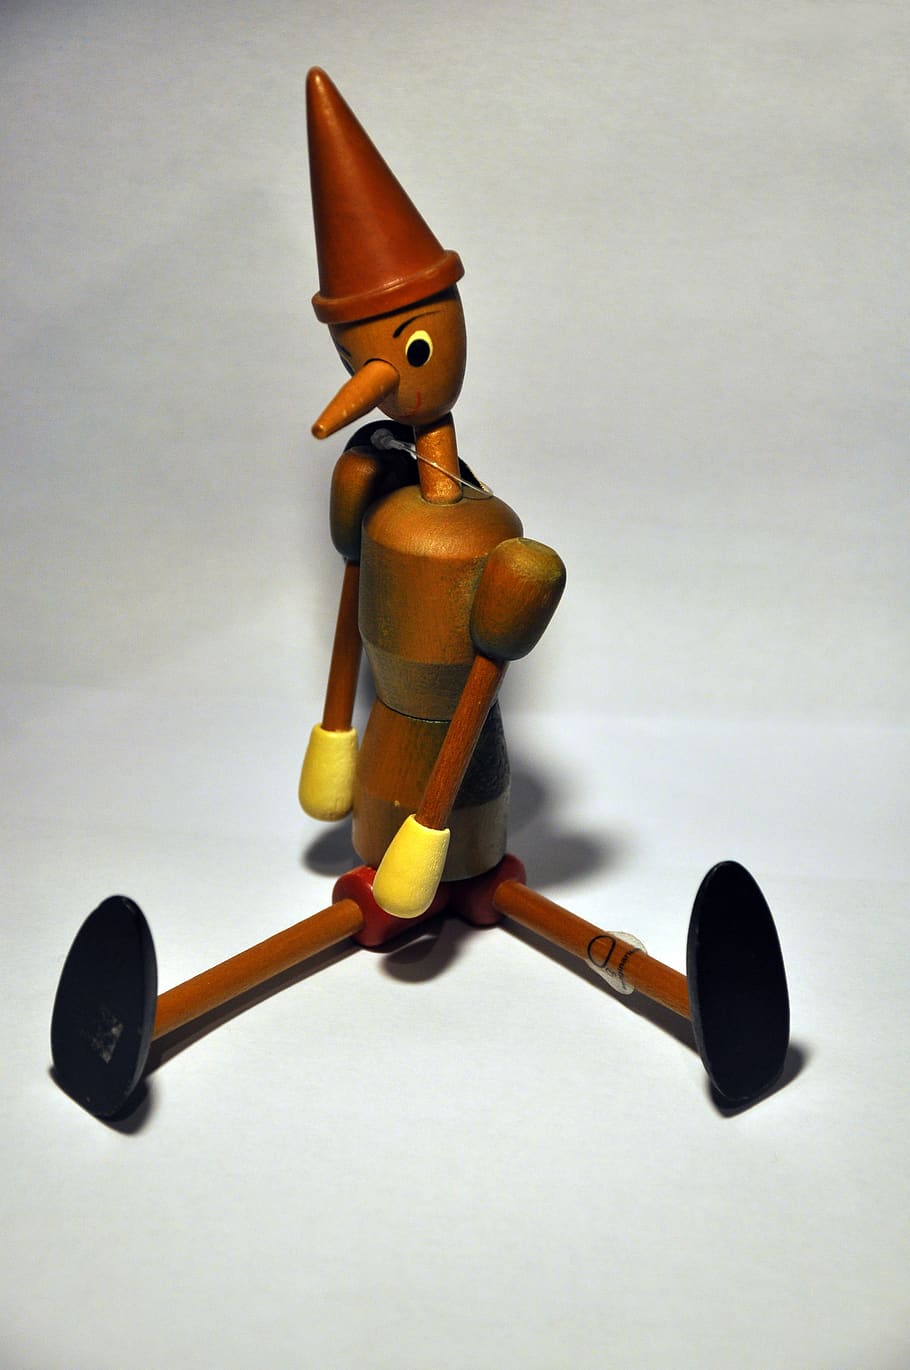 pinocchio, snowman, wood, tool, sculpture, toys, puppet, childhood, toy, indoors